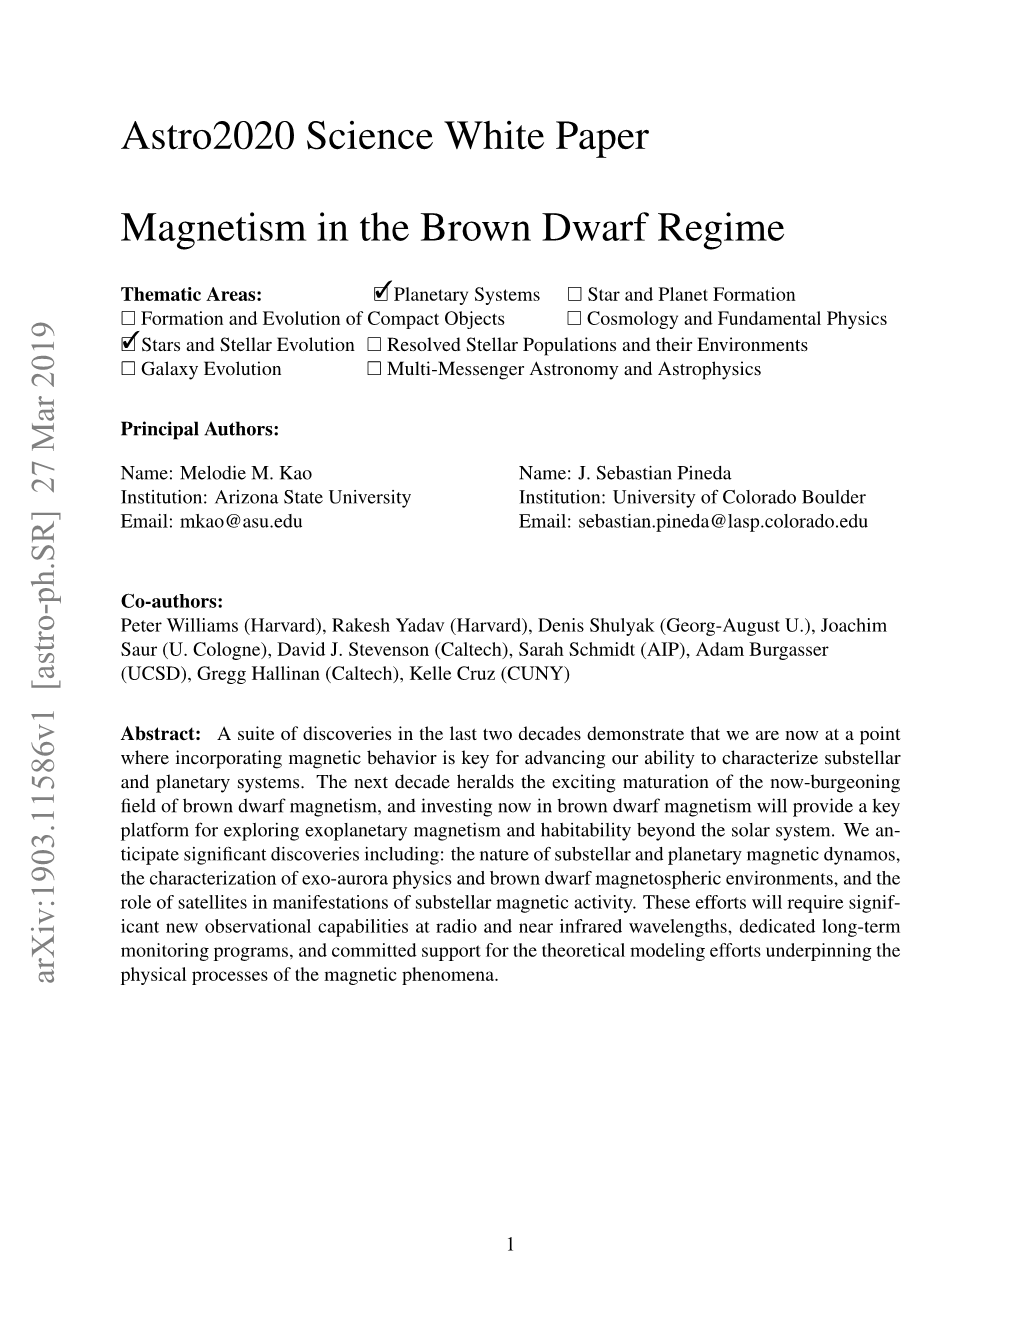 Astro2020 Science White Paper Magnetism in the Brown Dwarf